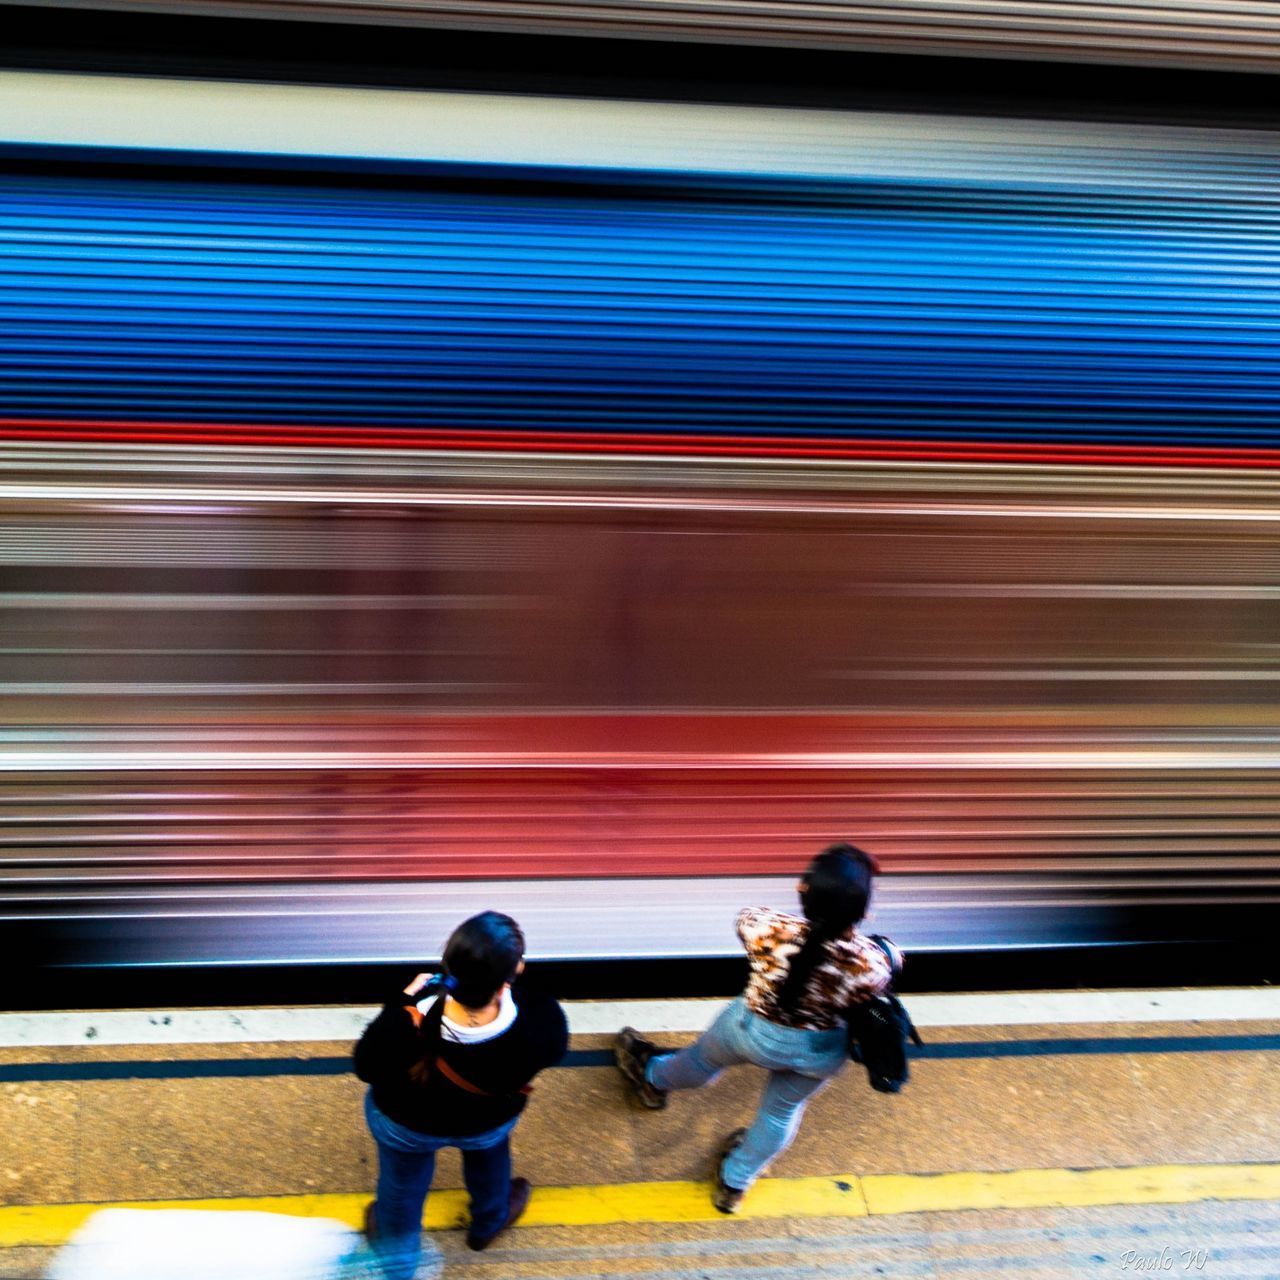 lifestyles, men, transportation, blurred motion, leisure activity, illuminated, motion, full length, indoors, person, childhood, casual clothing, night, boys, railroad station platform, on the move, rear view, travel